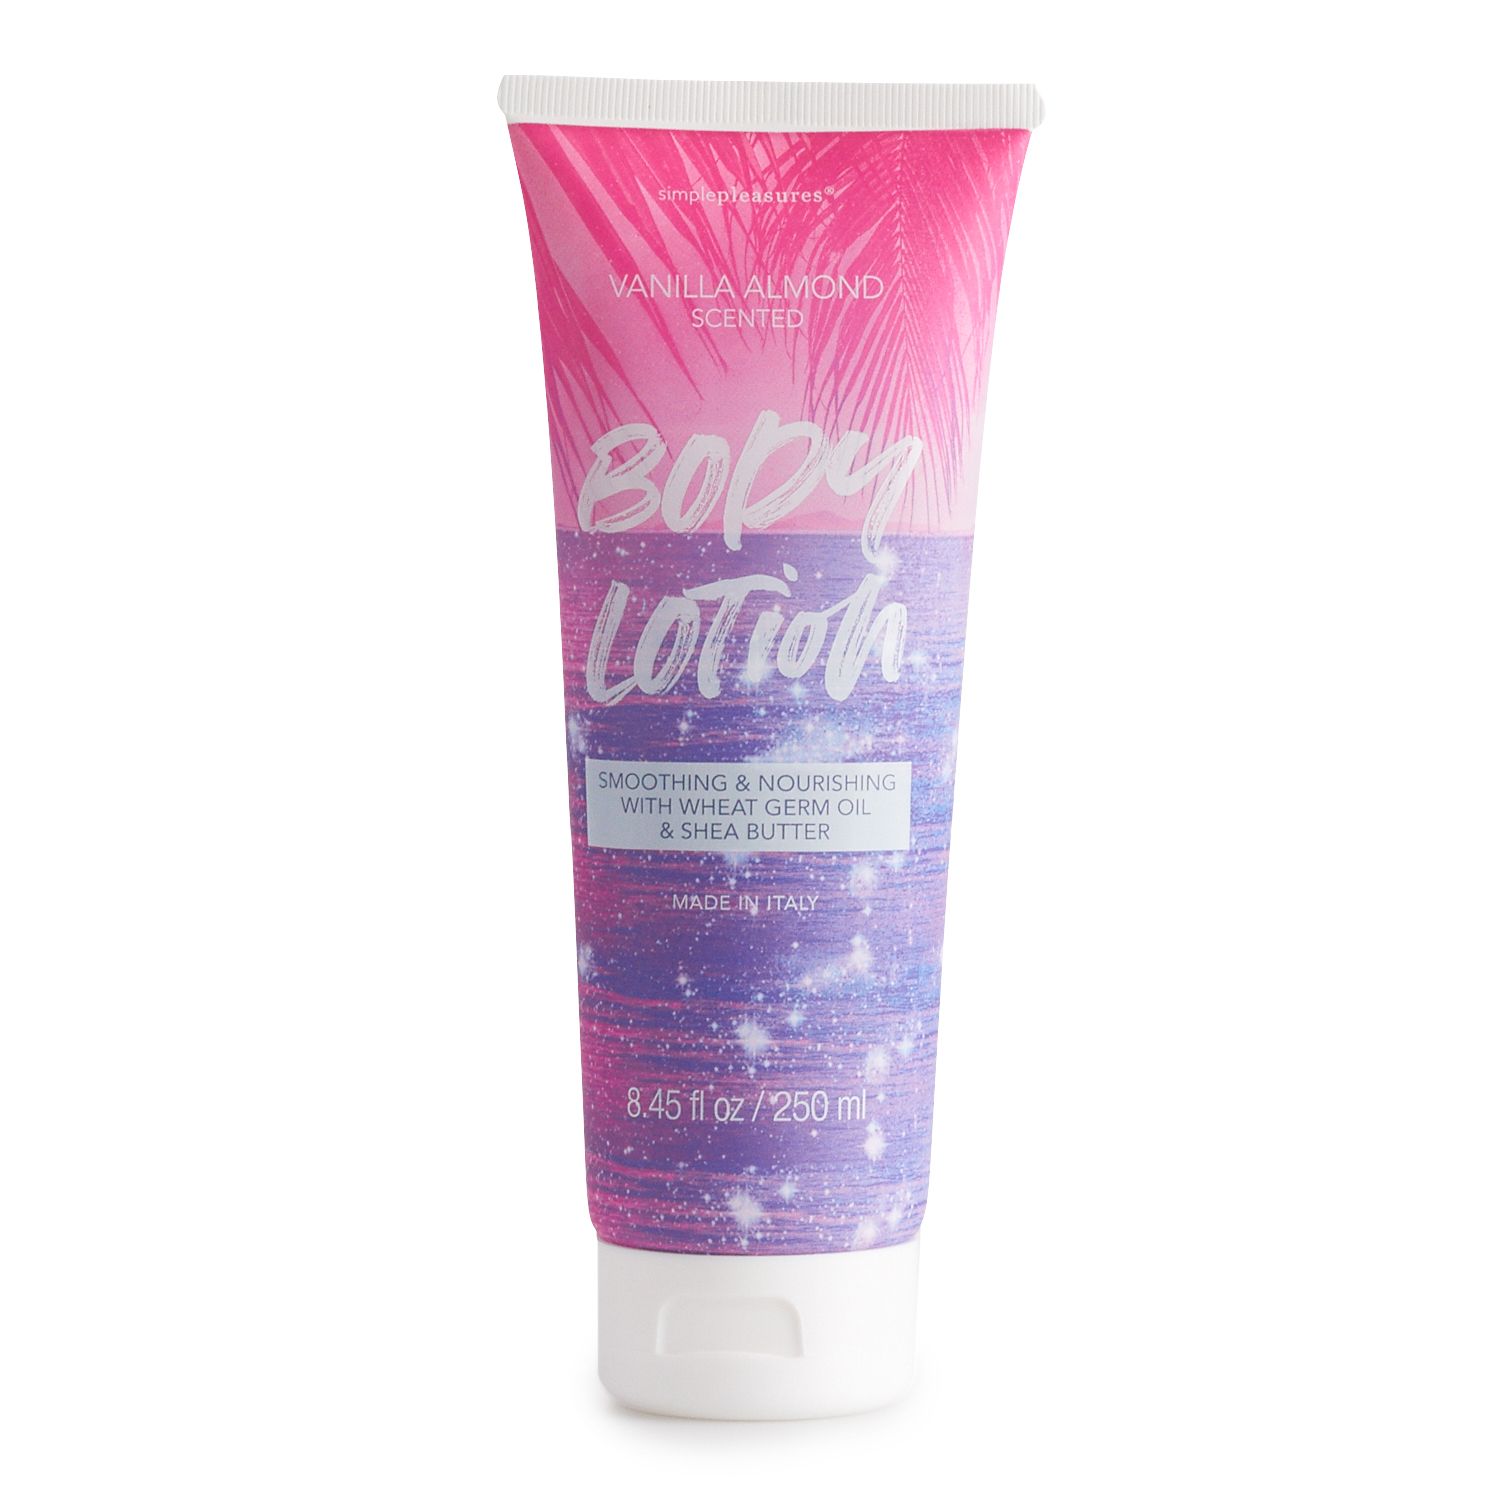 simple body lotion